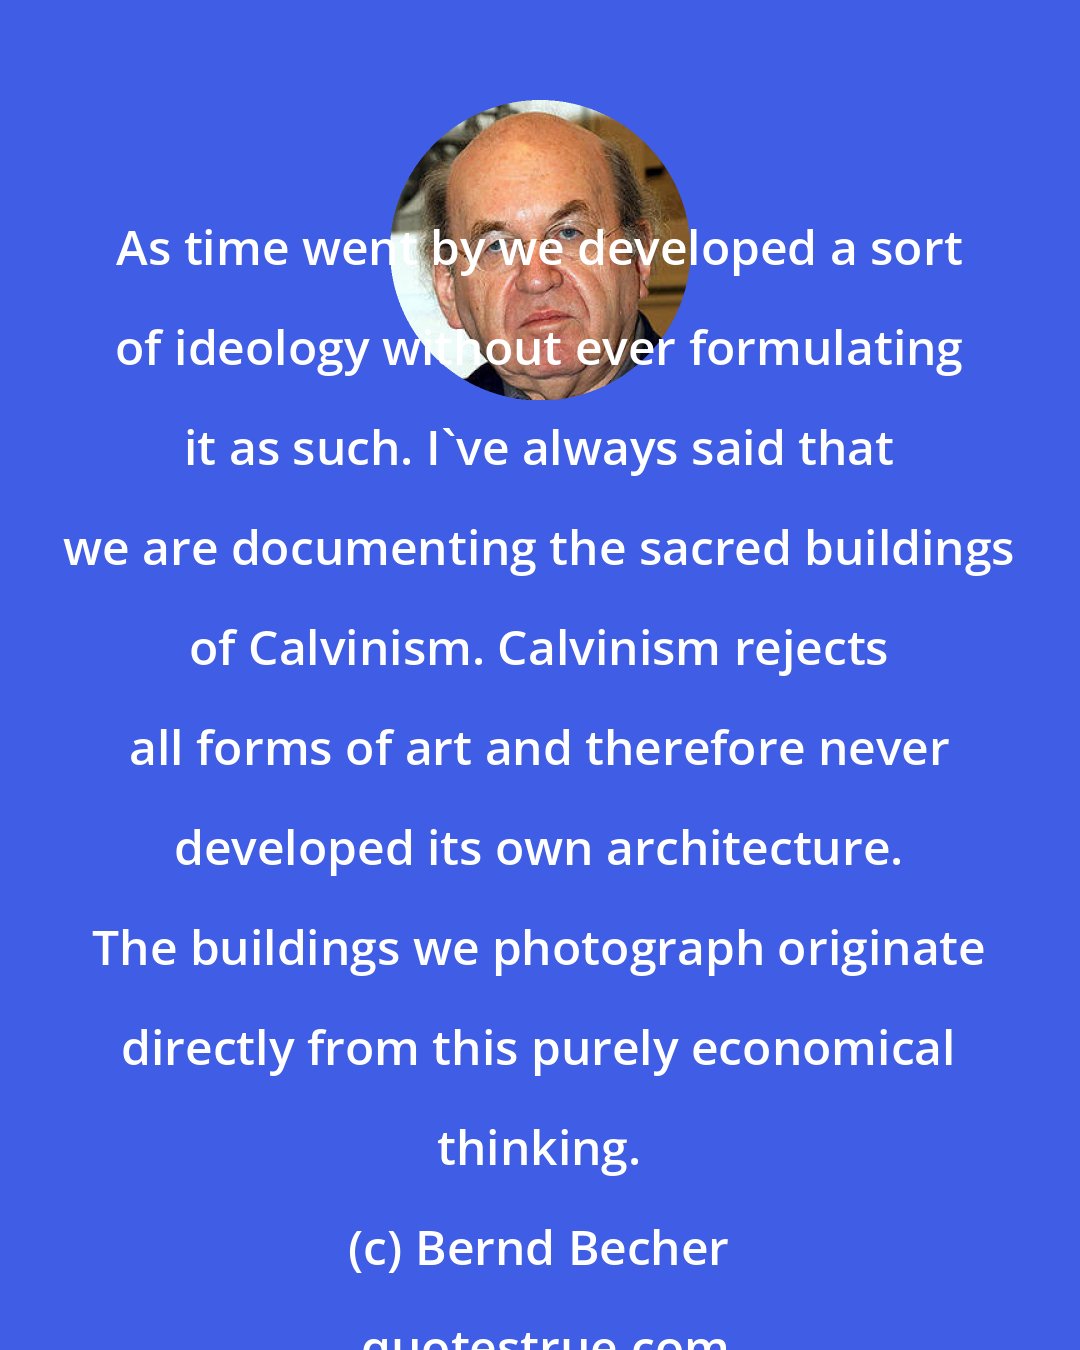 Bernd Becher: As time went by we developed a sort of ideology without ever formulating it as such. I've always said that we are documenting the sacred buildings of Calvinism. Calvinism rejects all forms of art and therefore never developed its own architecture. The buildings we photograph originate directly from this purely economical thinking.